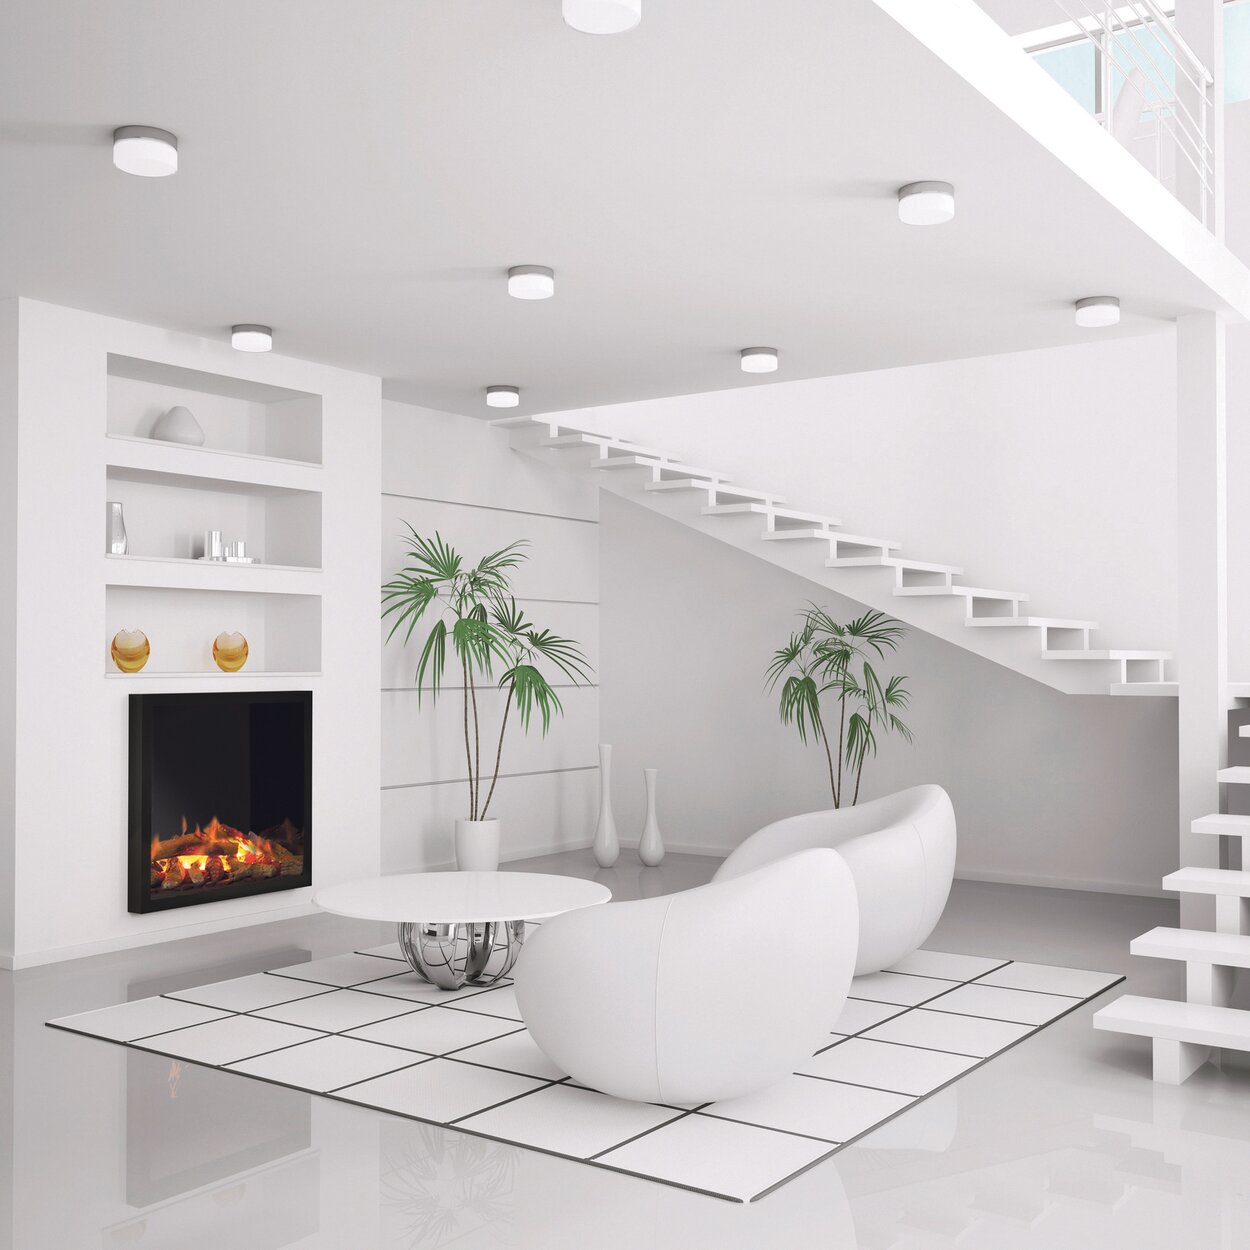 Juneau electric fire in white living room with staircase and white furniture